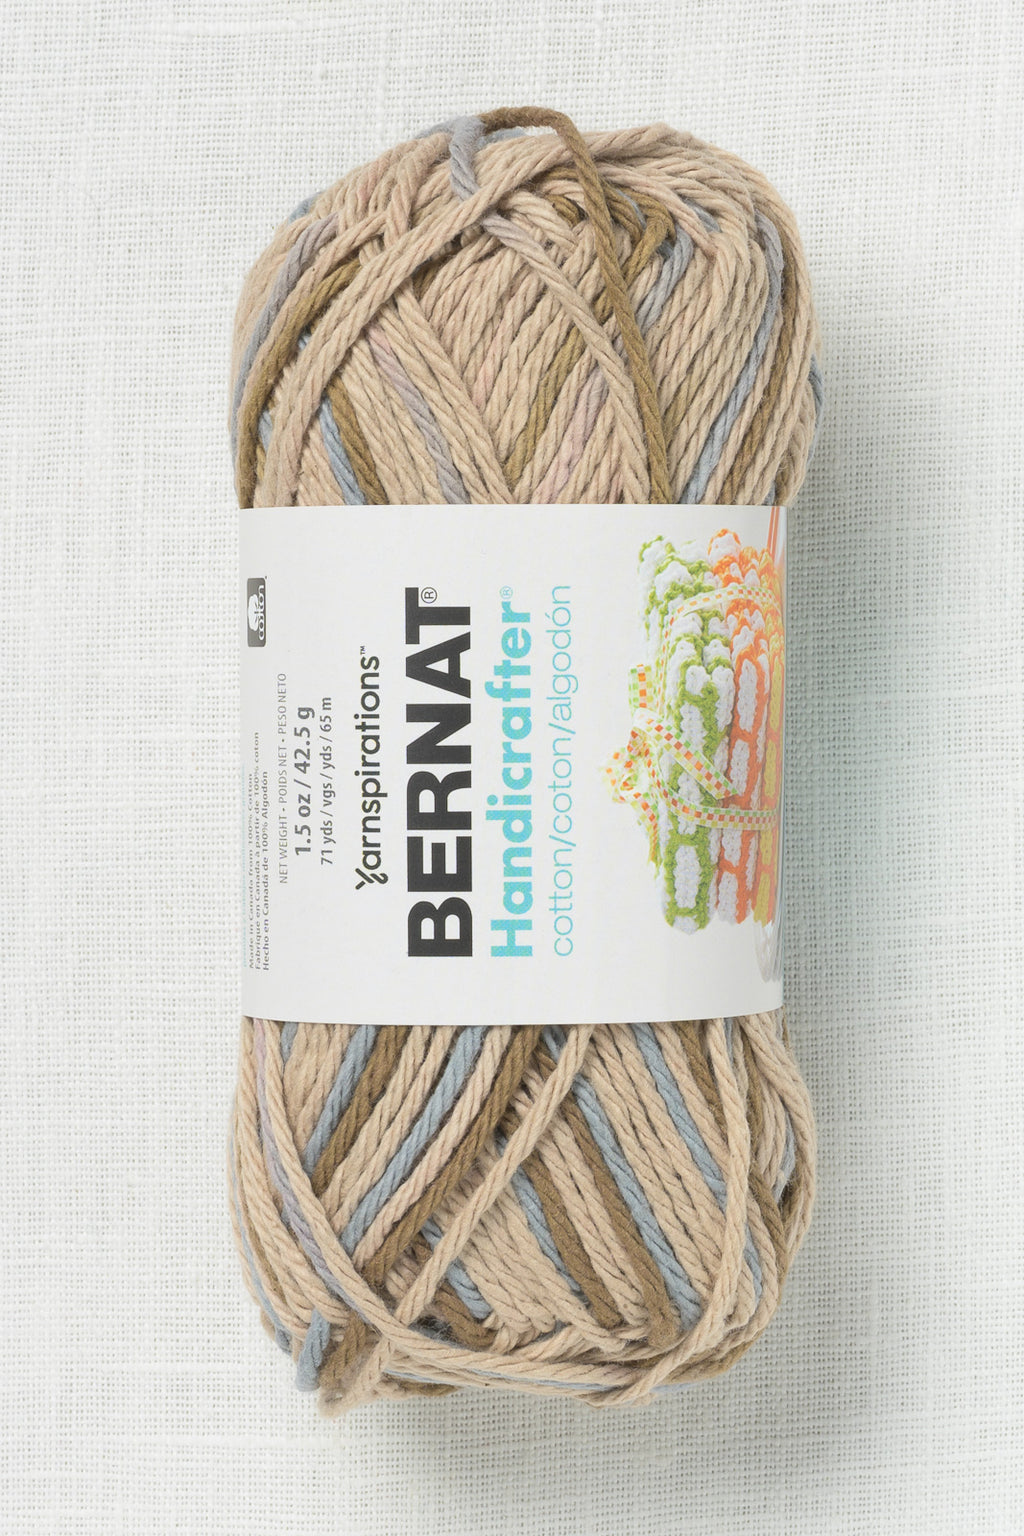 Bernat Handicrafter Cotton Prints and Ombres 42g Earth